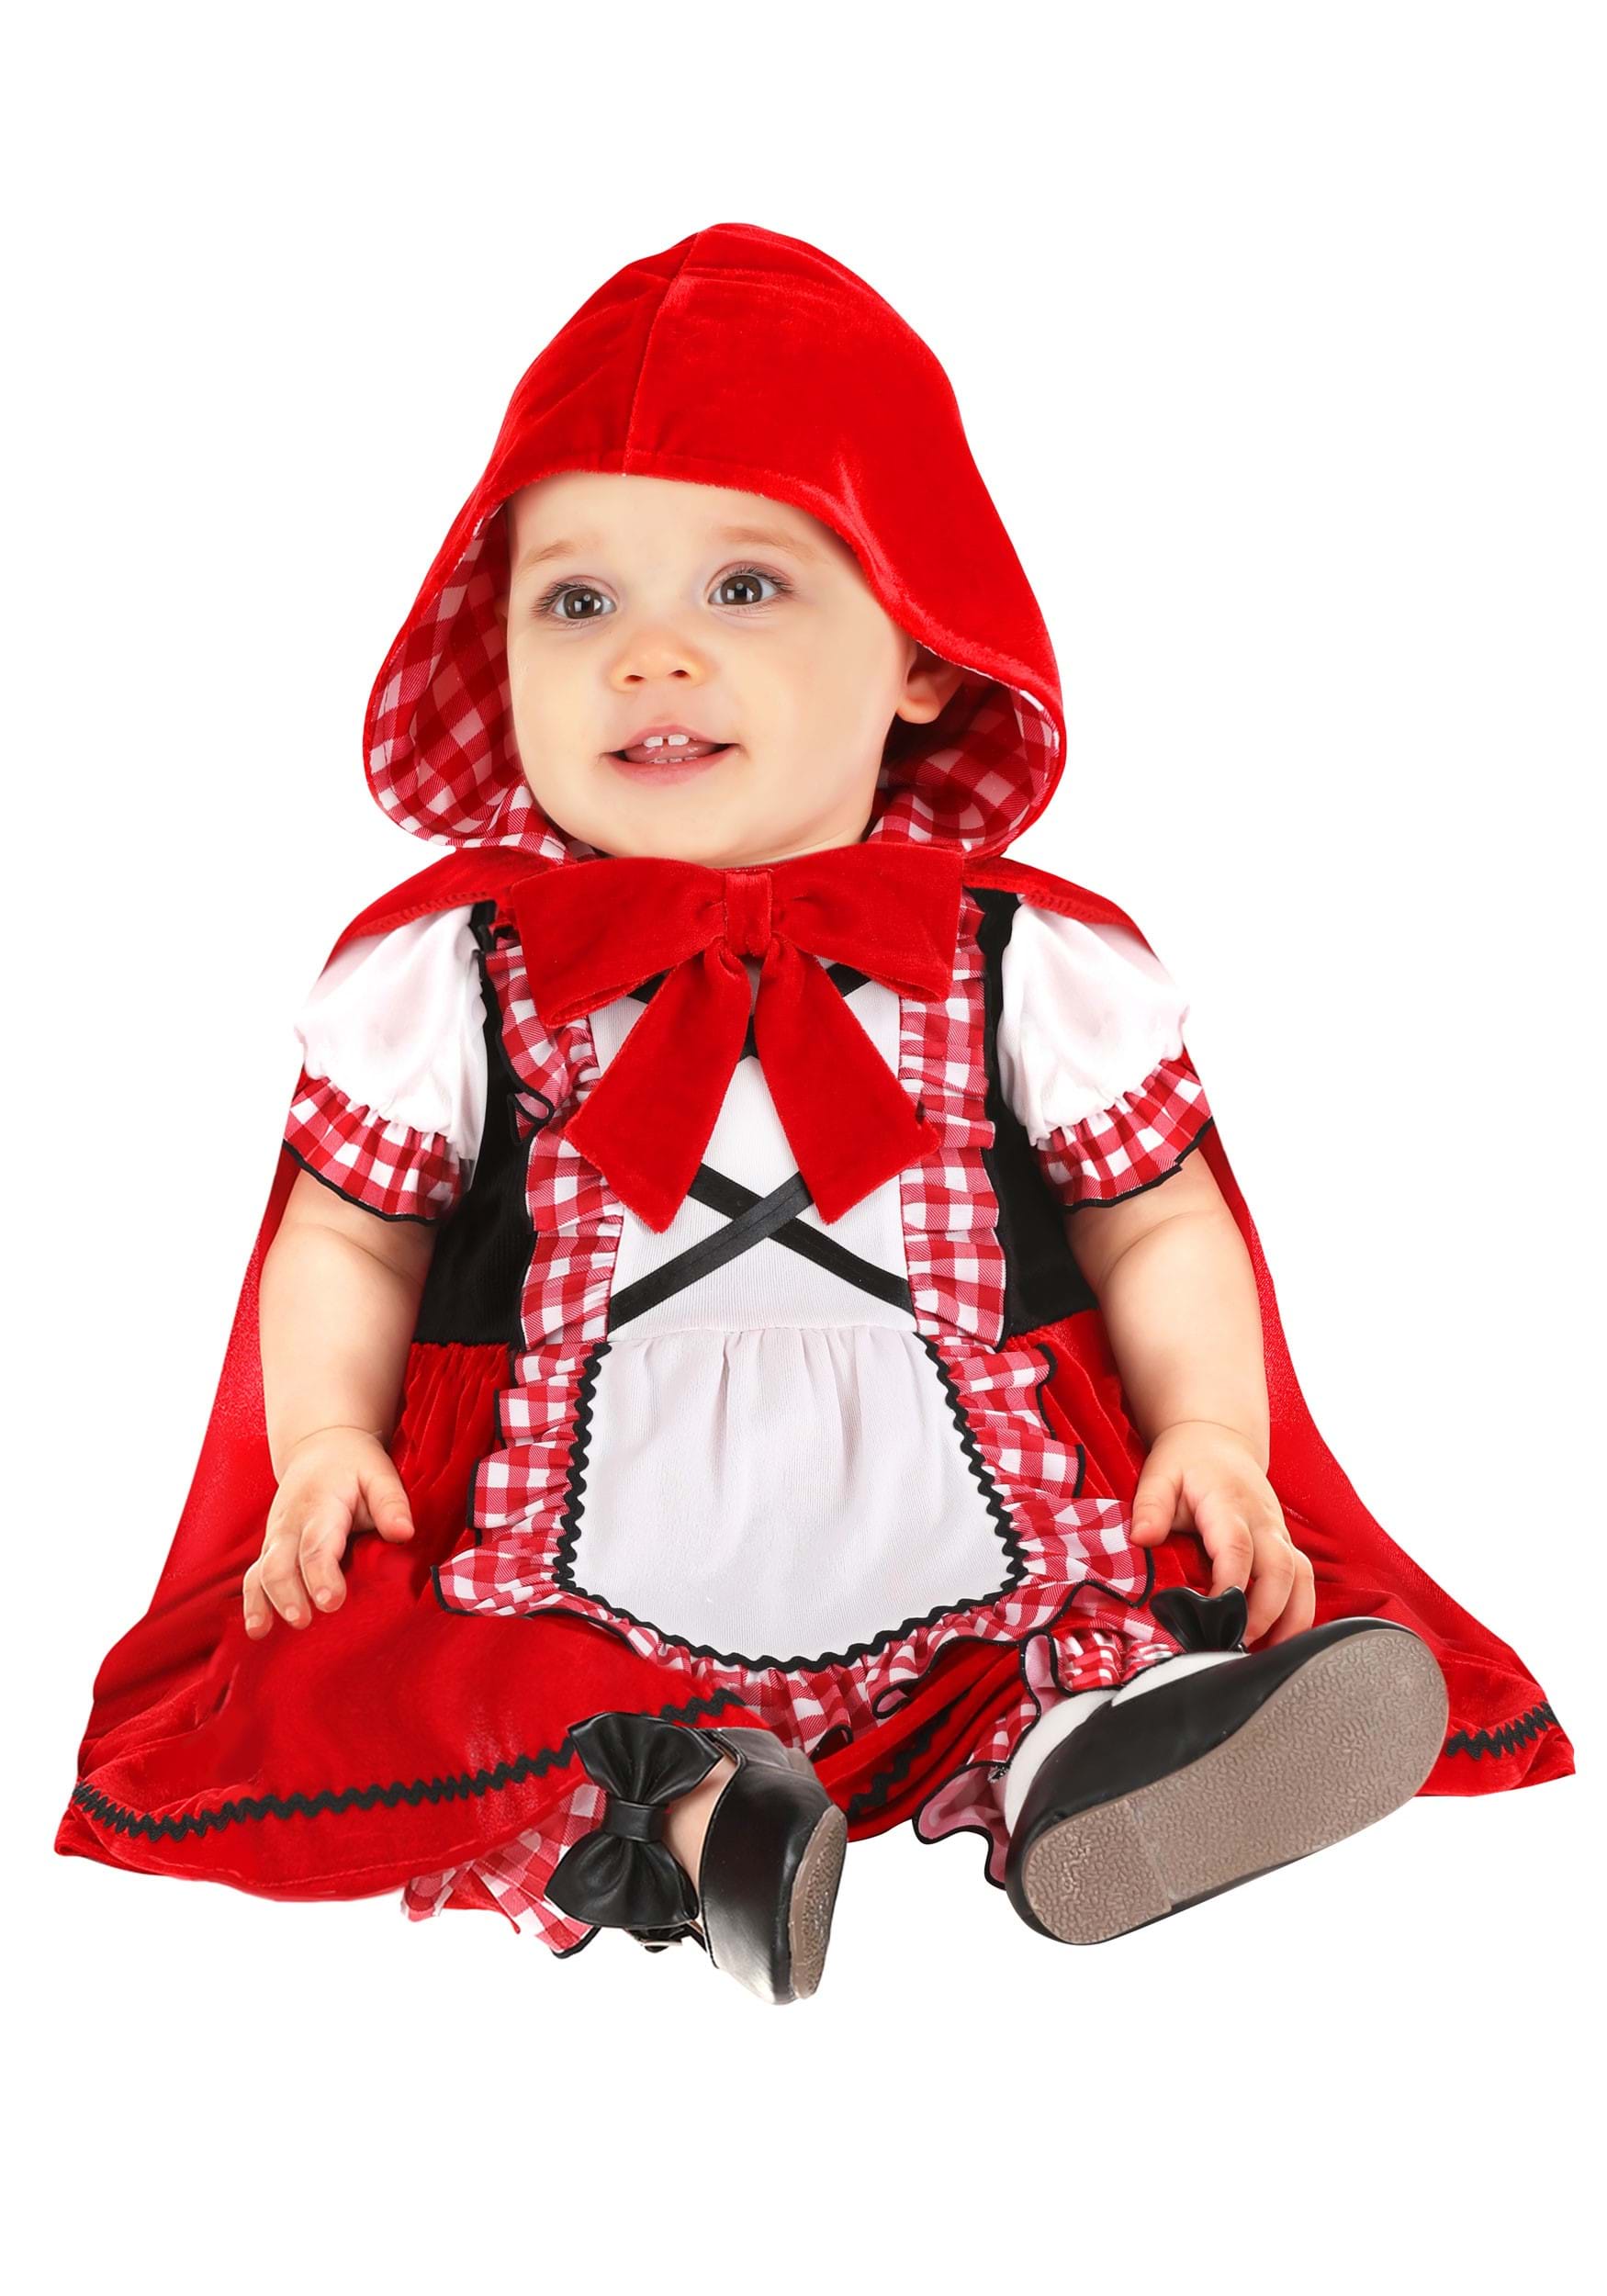 Photos - Fancy Dress Classic FUN Costumes  Red Riding Hood Costume for Infants | Storybook Costu 